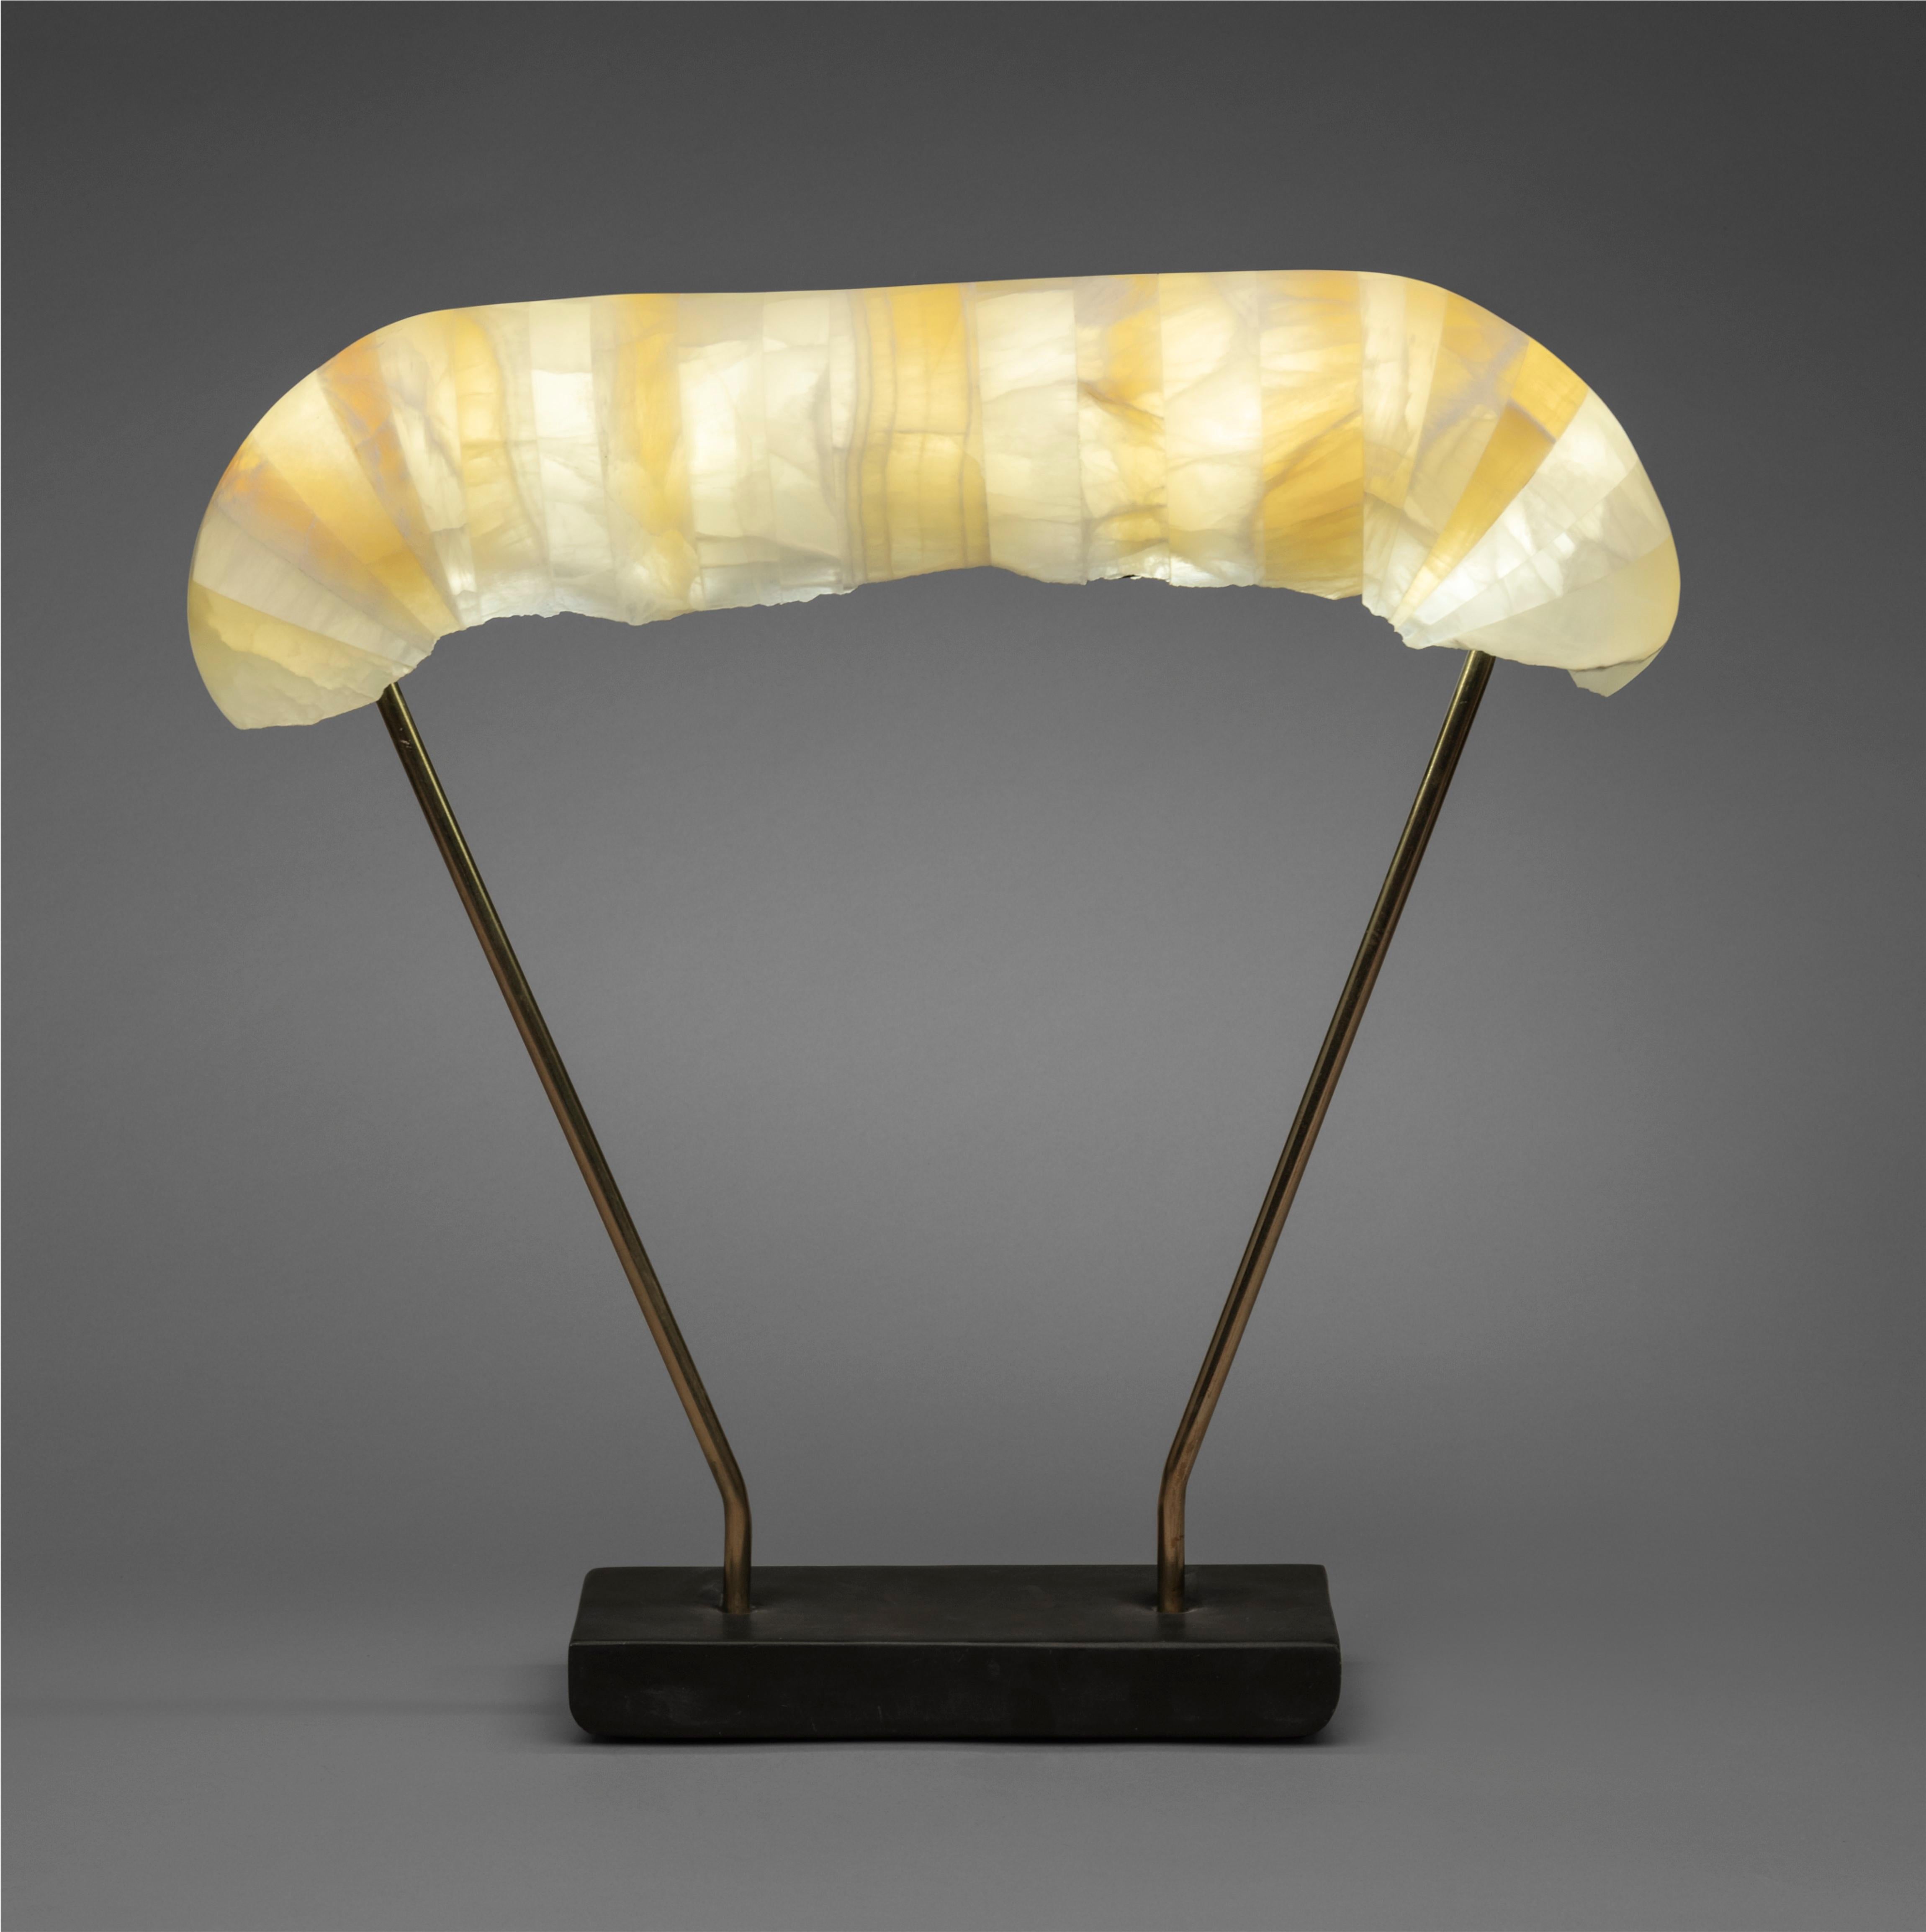 Illuminated sculpture composed of laminated alabaster using an additive (laminated) rather than the more traditional subtractive process of carving from a single block of stone. Individual prefabricated pieces of alabaster are glued together using